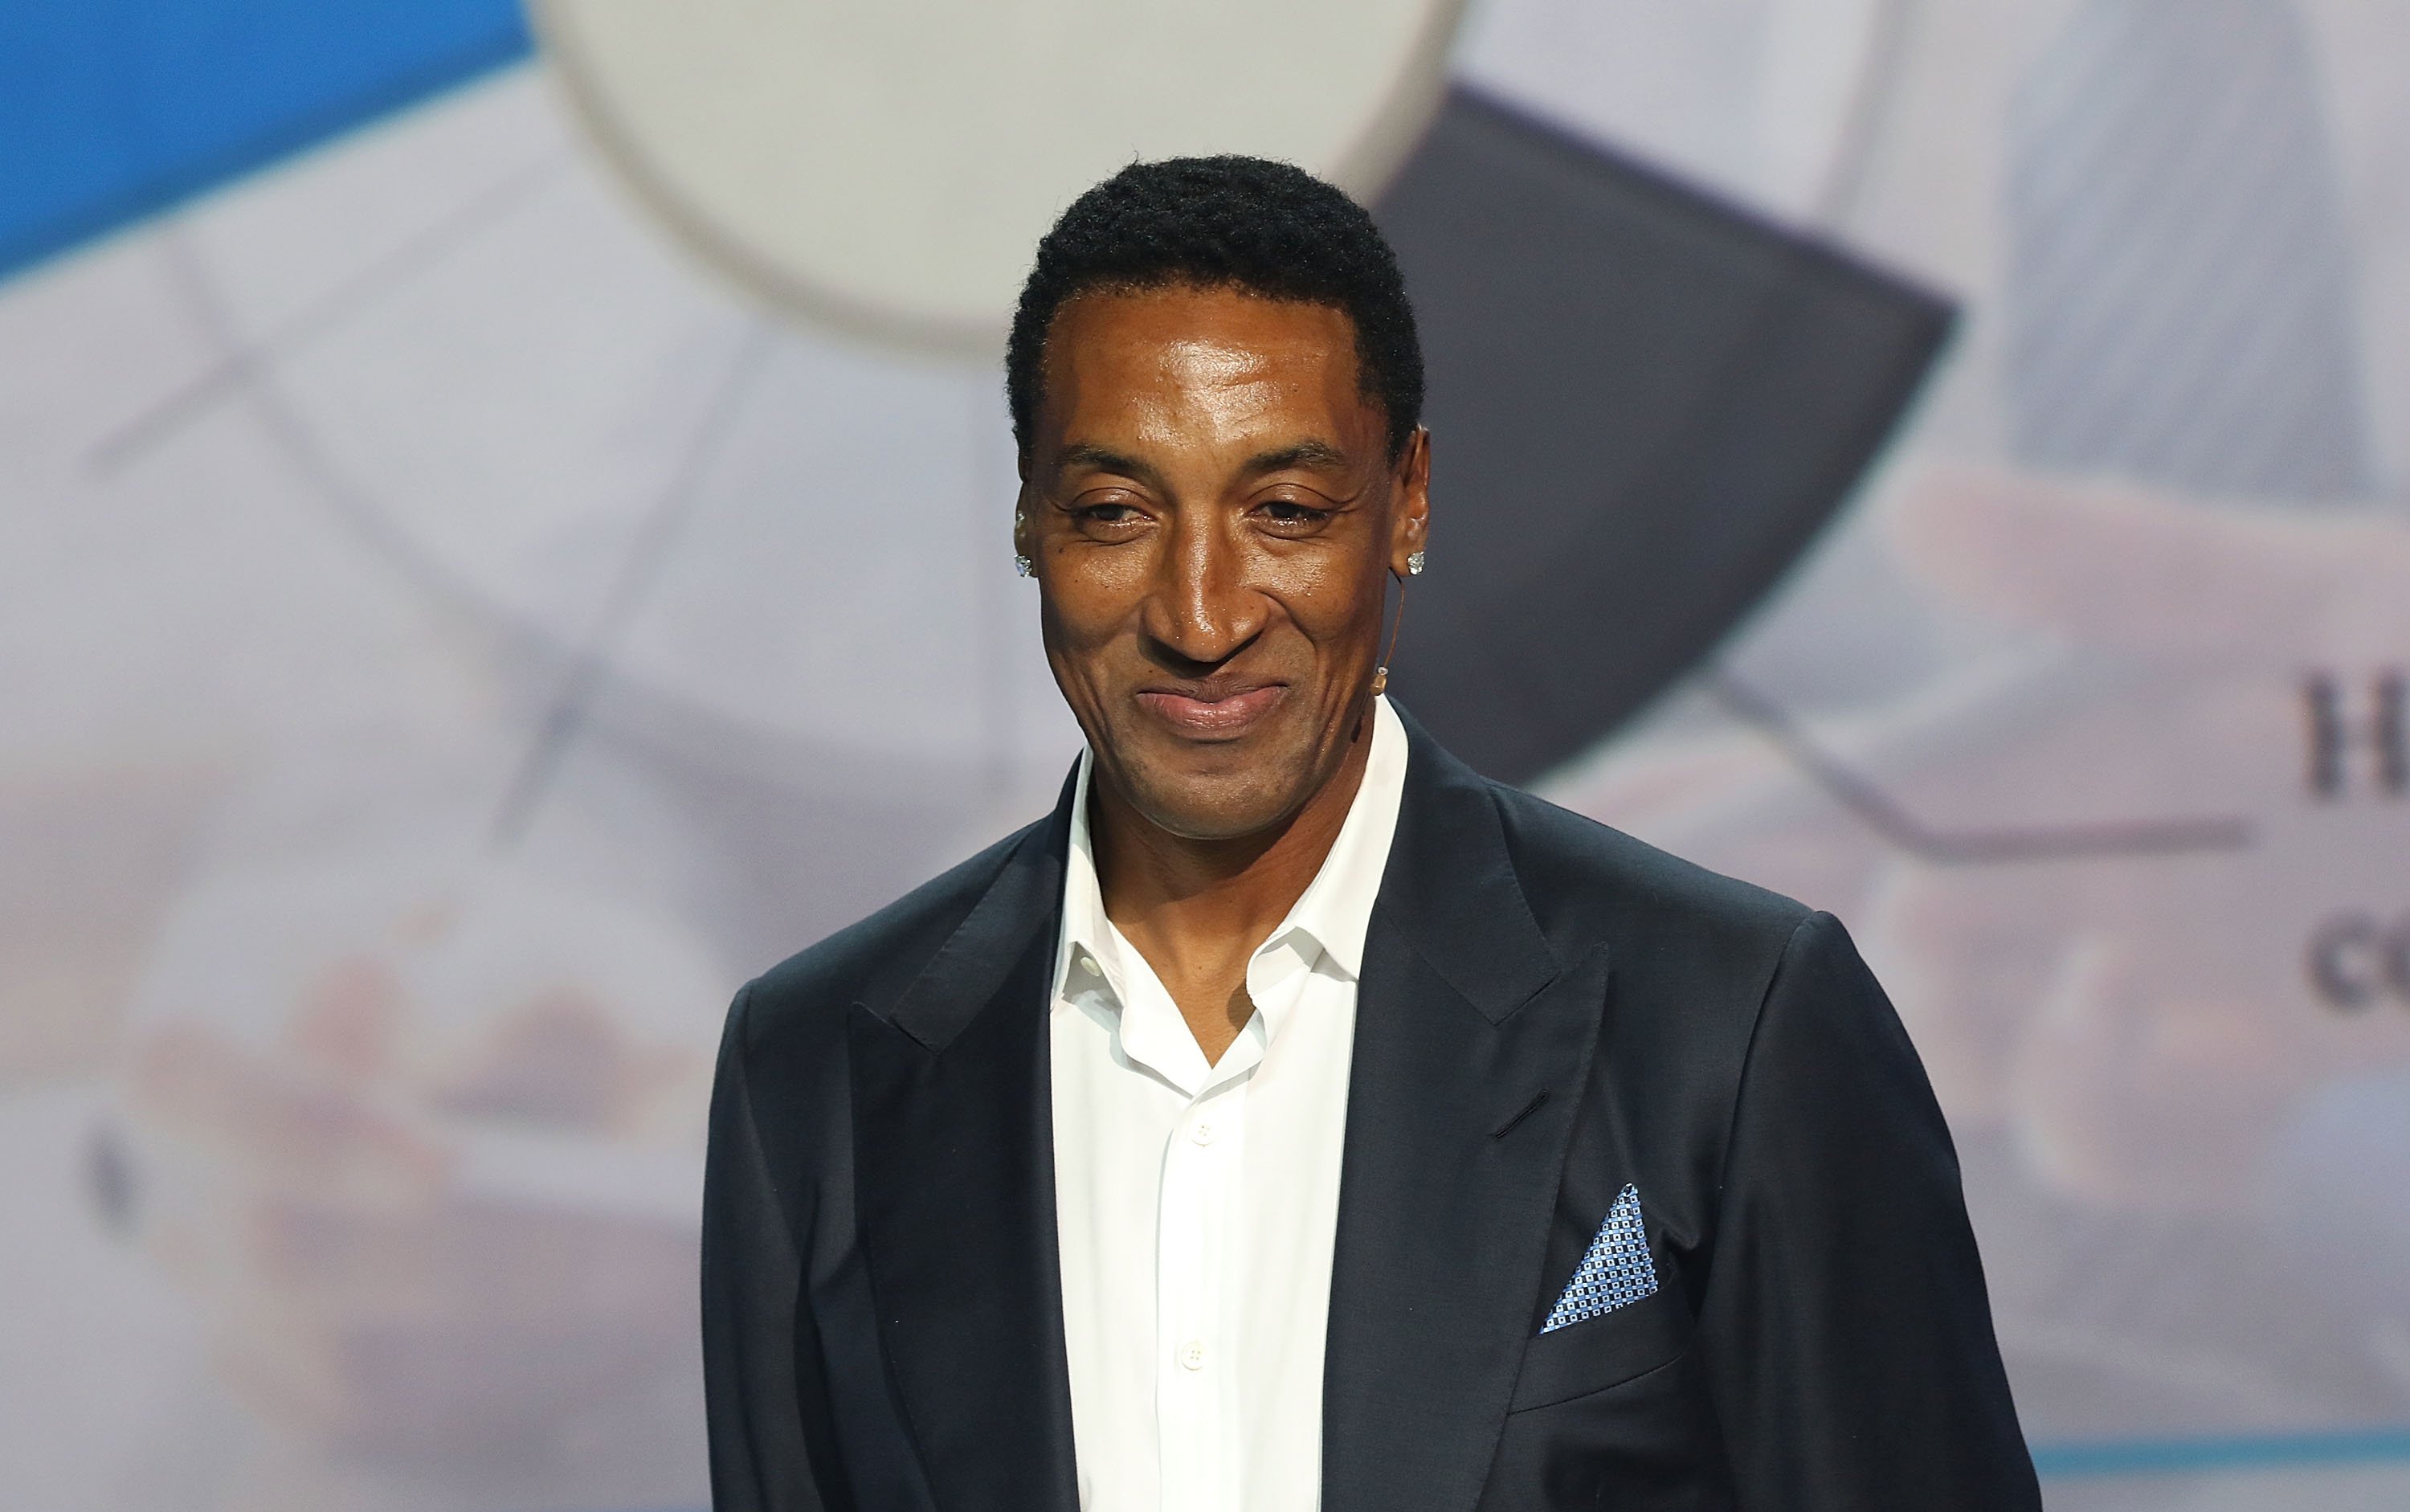  Scottie Pippen Attends Market America Conference 2016 at American Airlines Arena on February 4, 2016 in Miami, Florida. | Photo: GettyImages